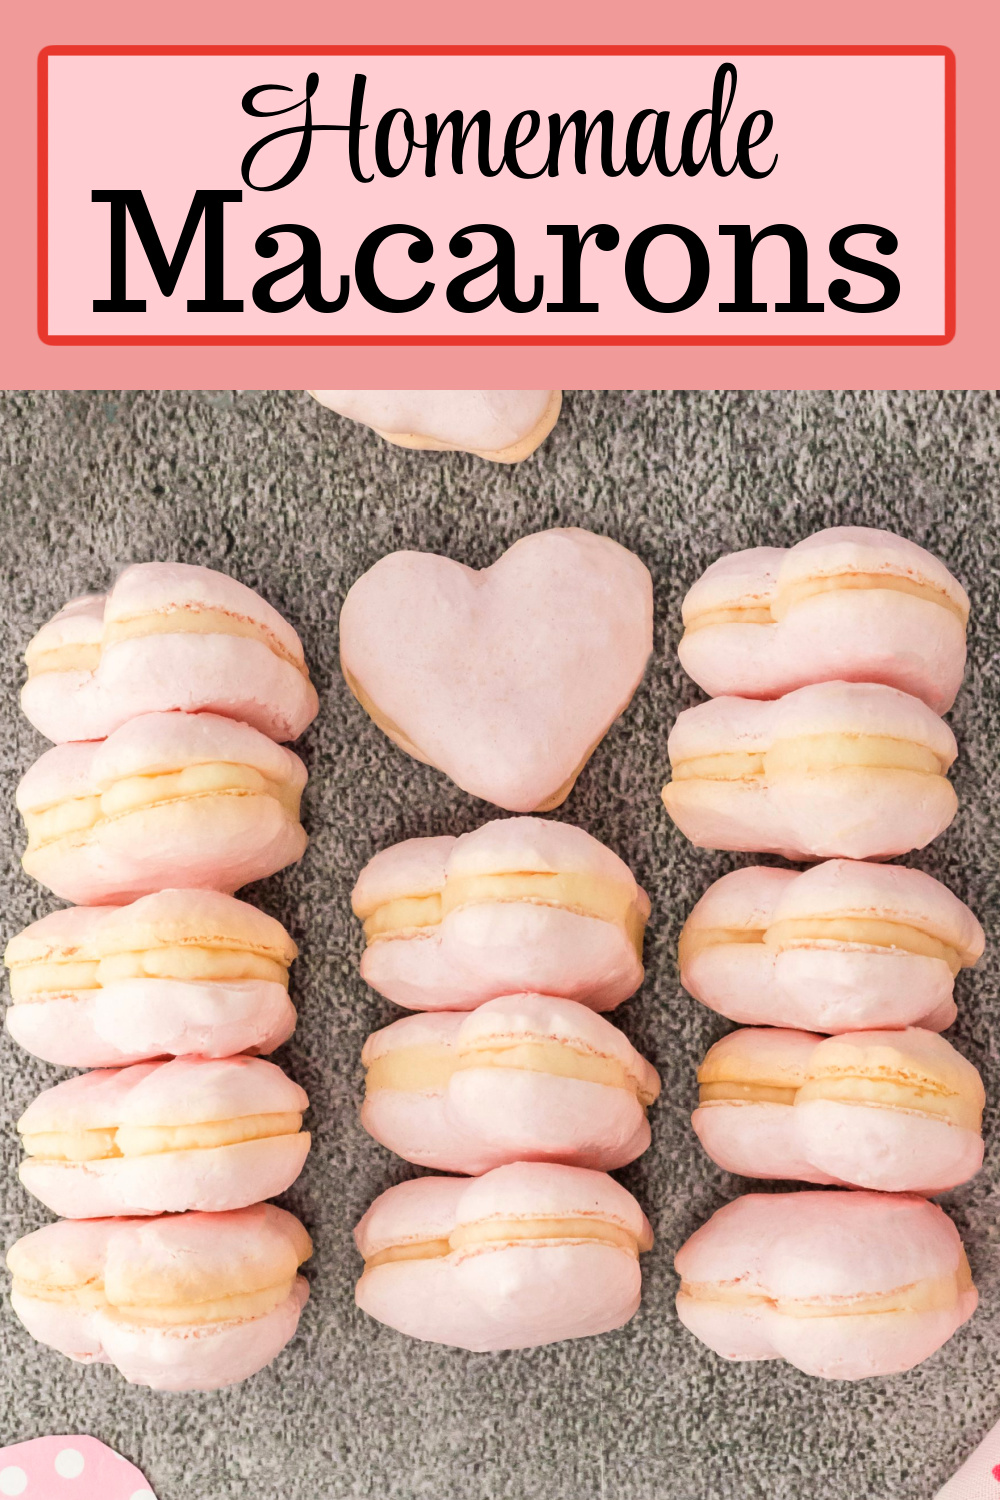 This Macarons Recipe features a light and airy cookie sandwiched together with a homemade vanilla buttercream. #macarons #macaronsrecipe #buttercreamicing #vanillabuttercream #cookies #cookierecipes #macaroons via @melissasssk